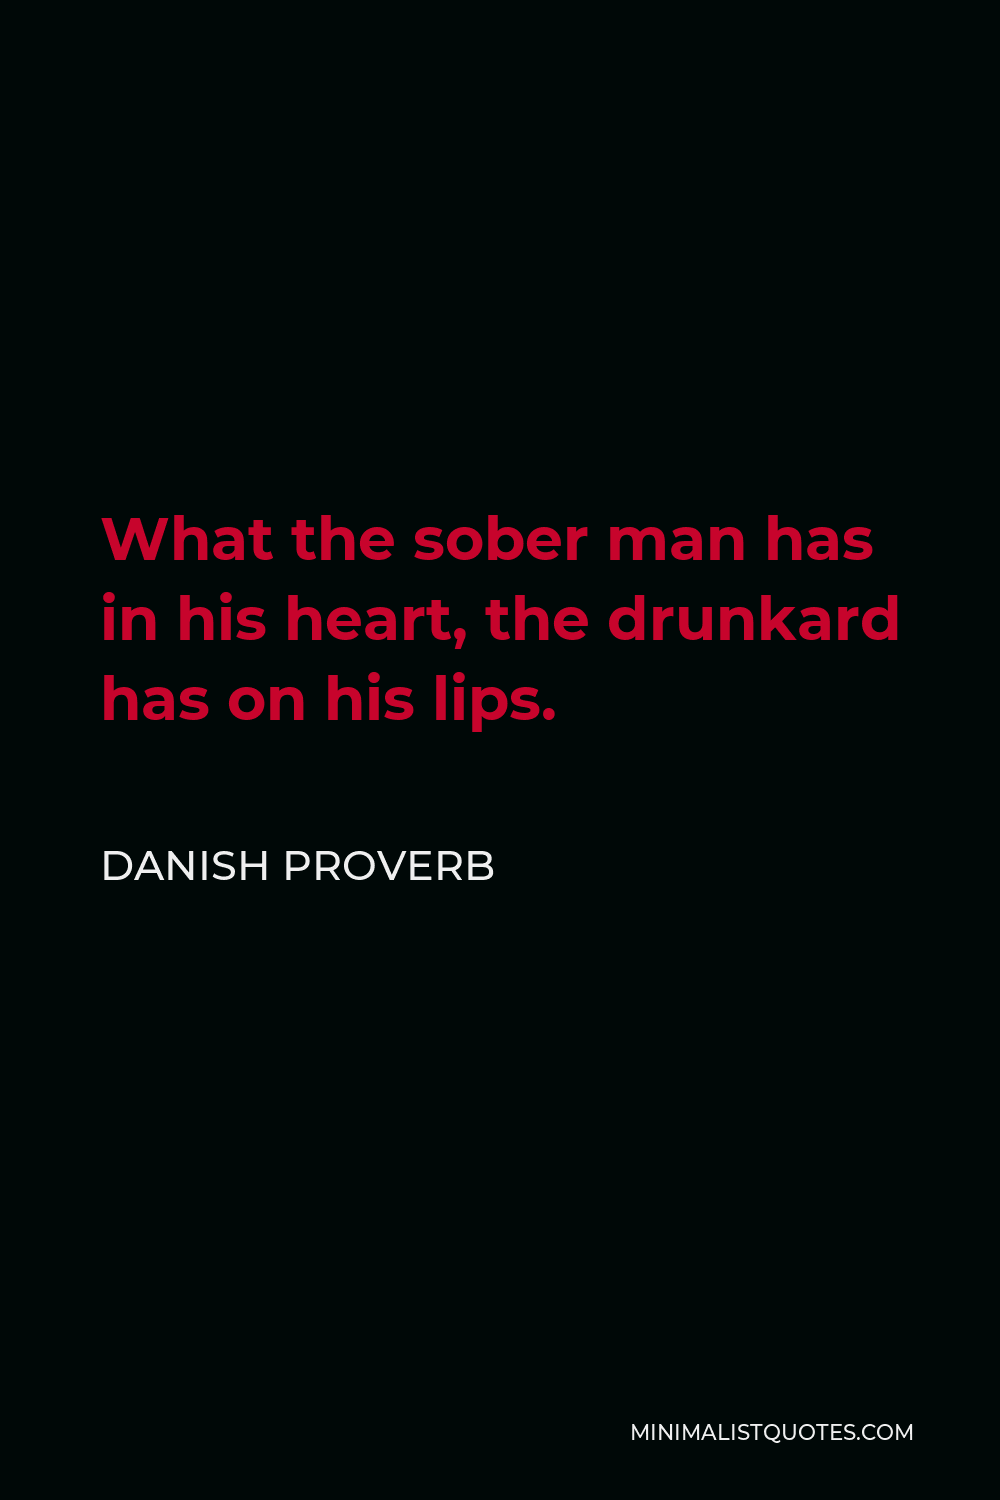 Danish Proverb Quote - What the sober man has in his heart, the drunkard has on his lips.